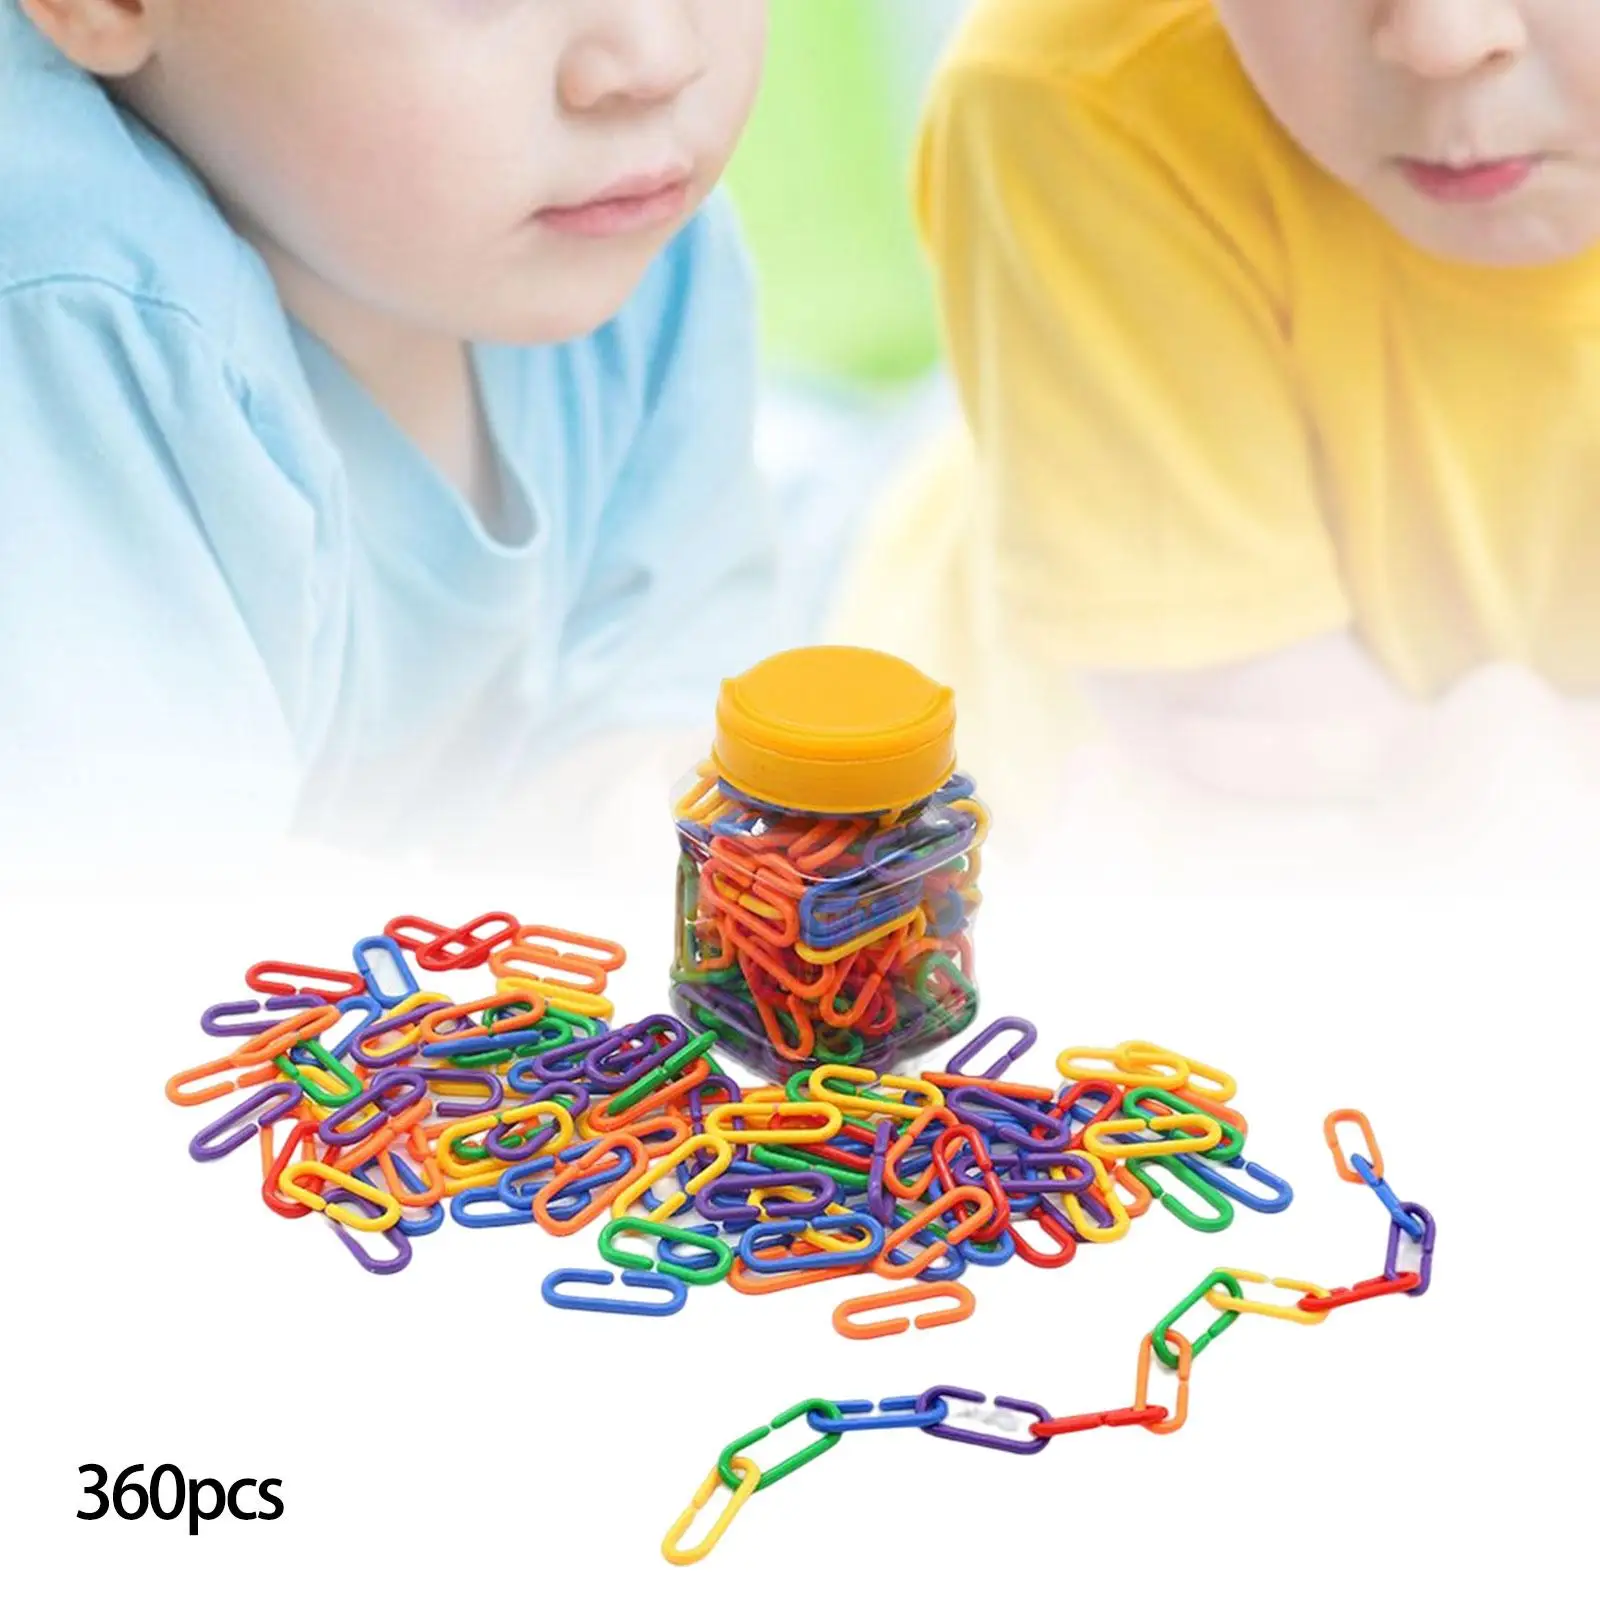 360 Rainbow Color Hook Links Connected Buckle Children`s Learning Toy DIY Projects